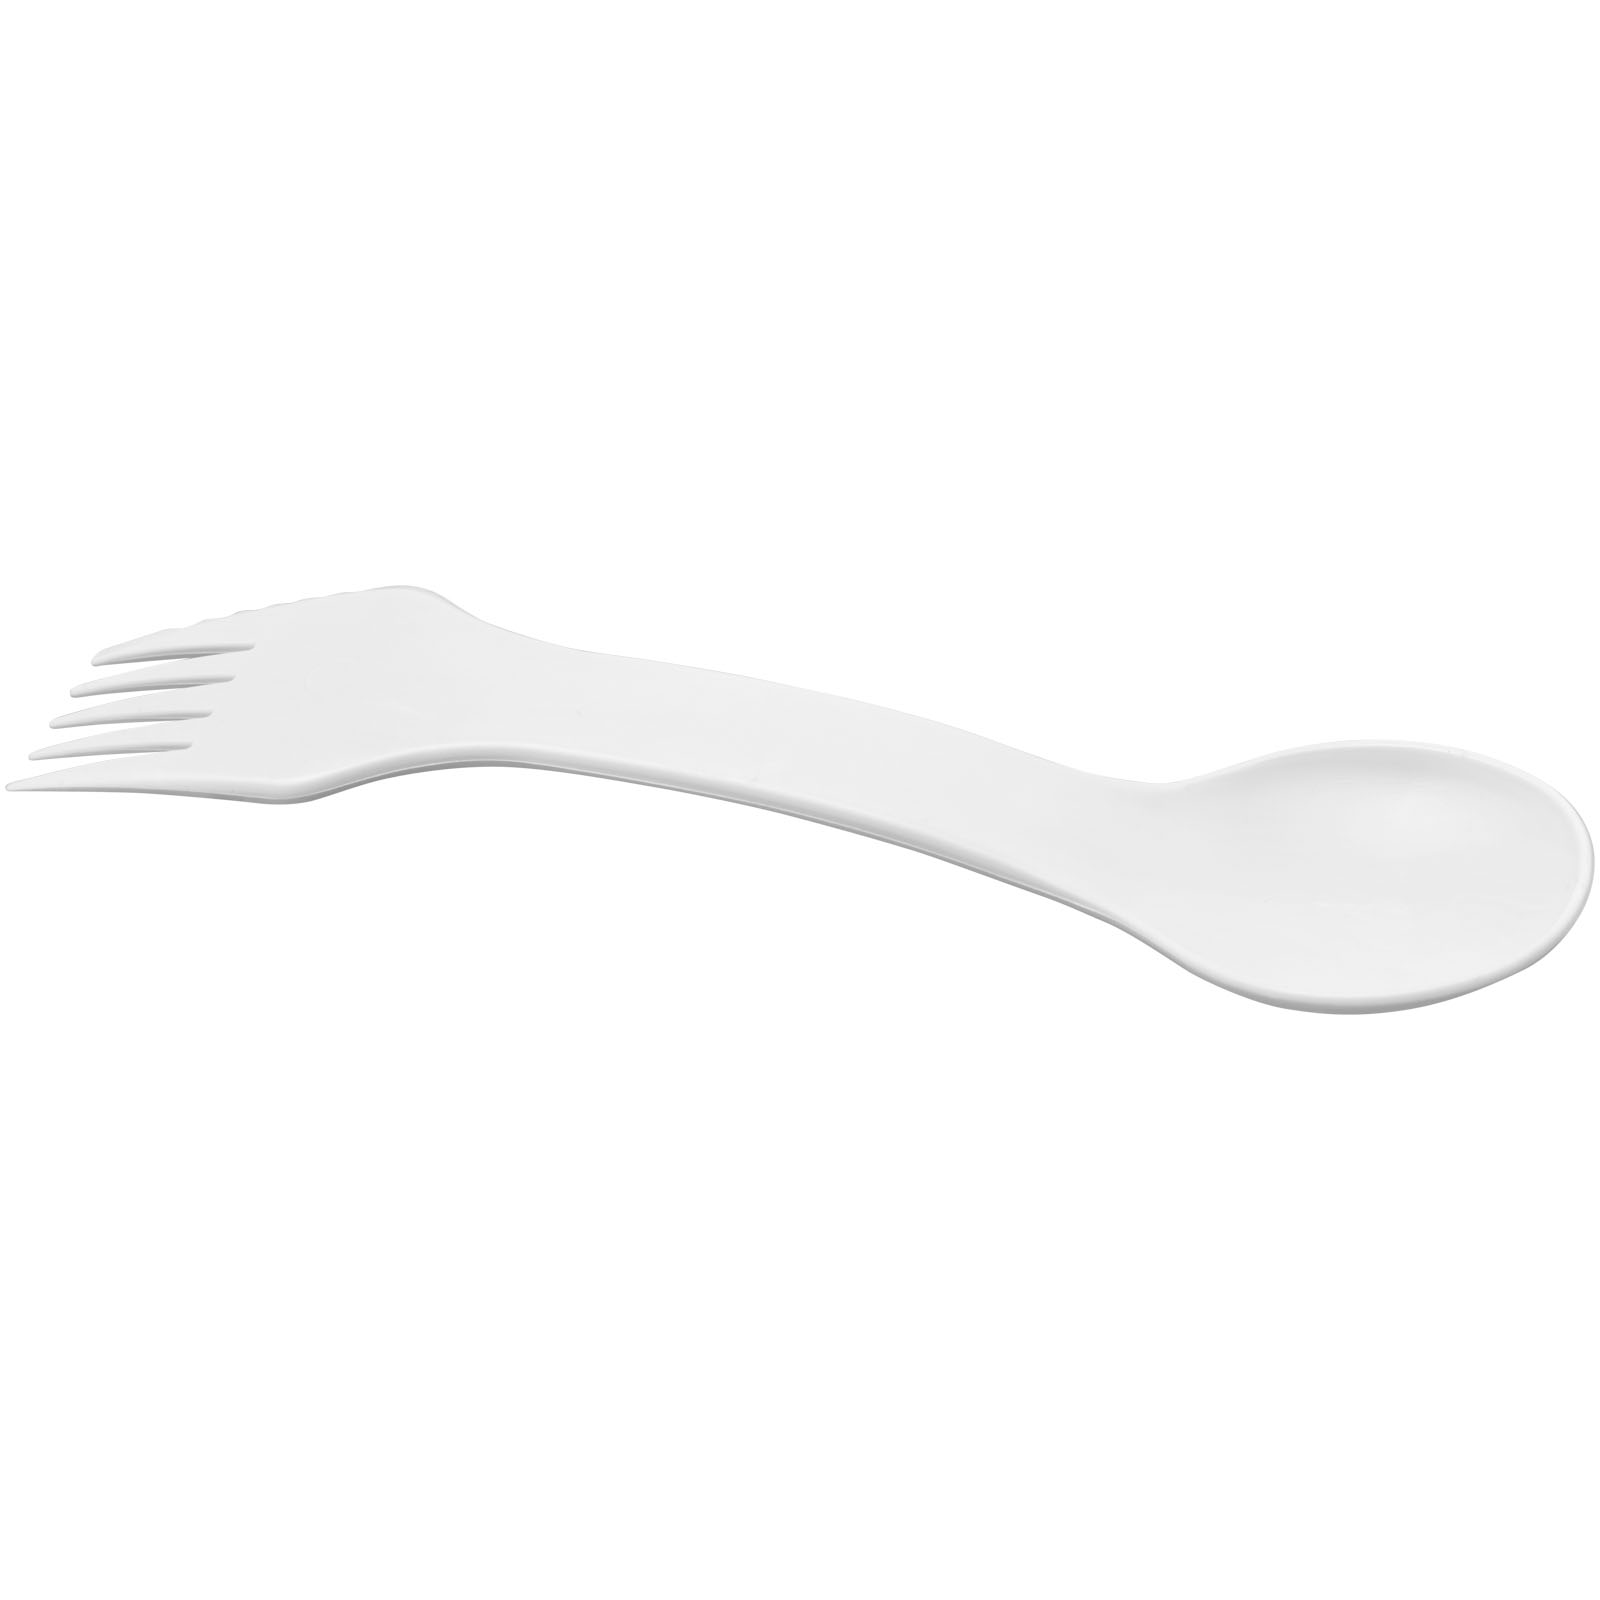 Sports & Leisure - Epsy Pure 3-in-1 spoon, fork and knife